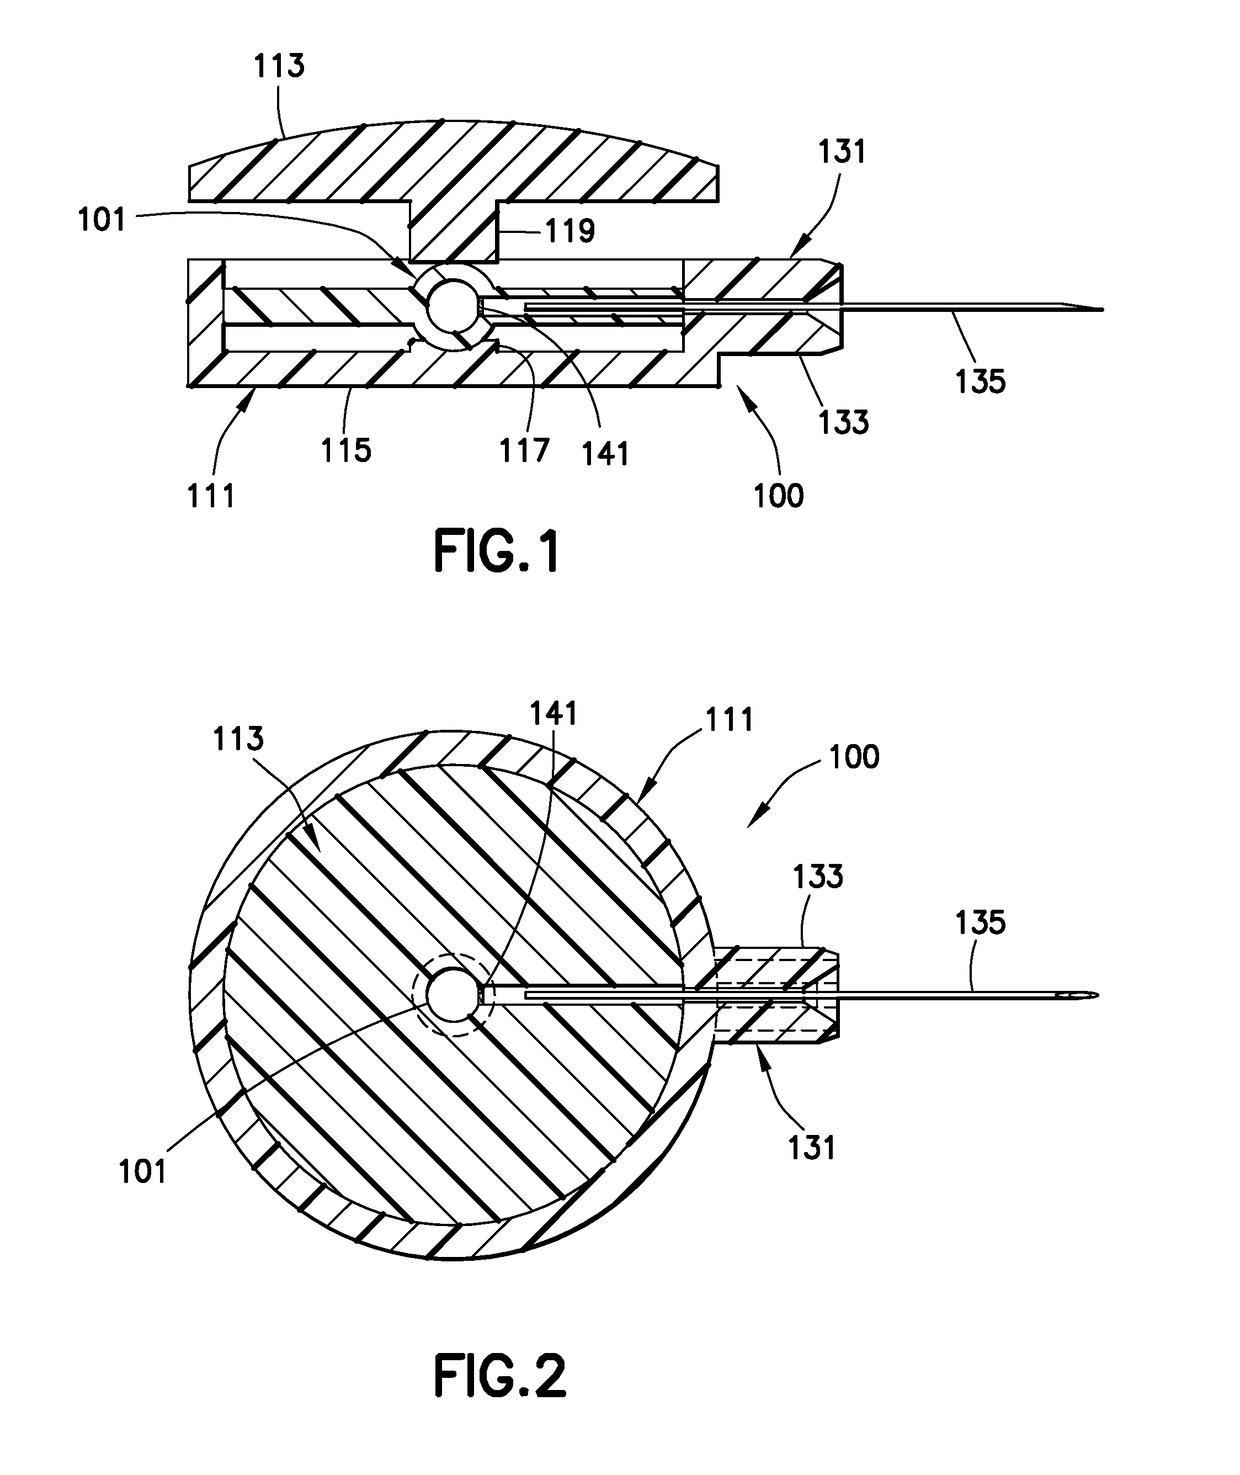 Low dose prefilled drug delivery device and method